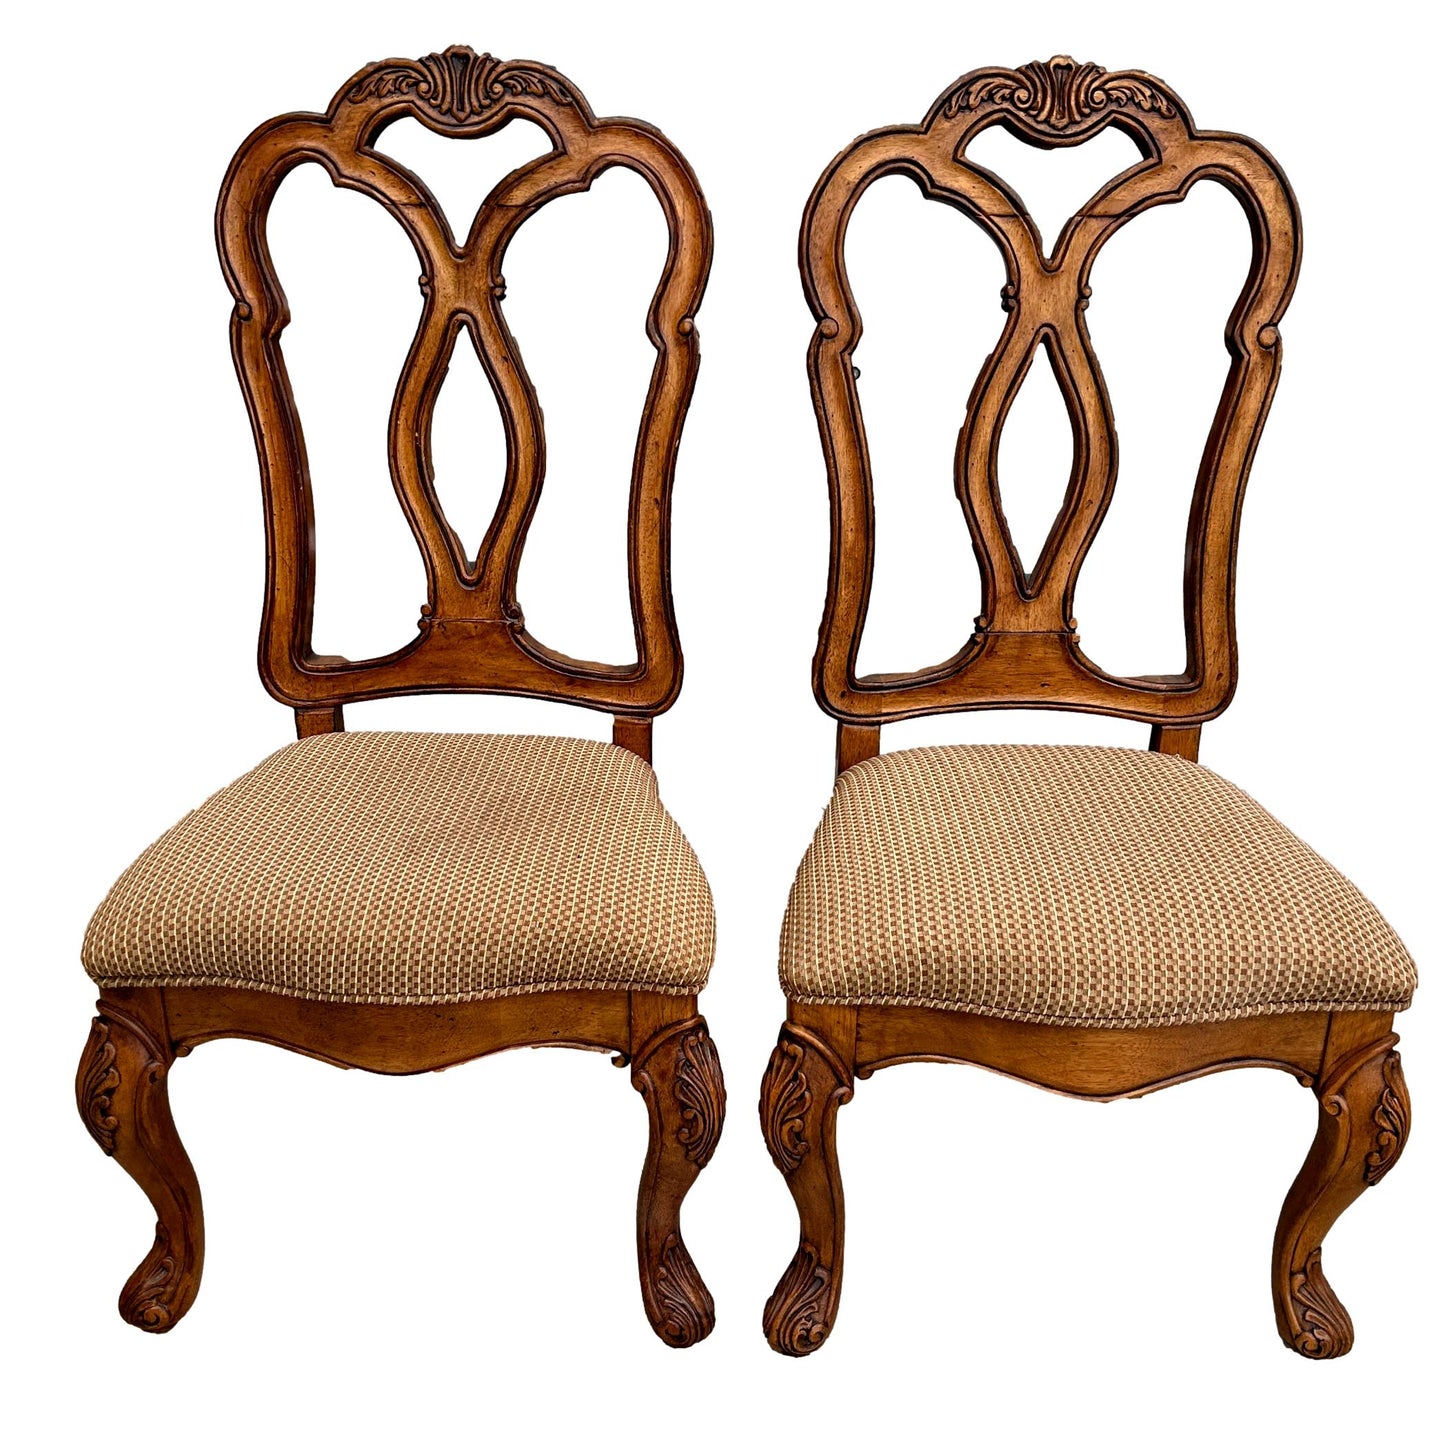 Pair of Side Chairs